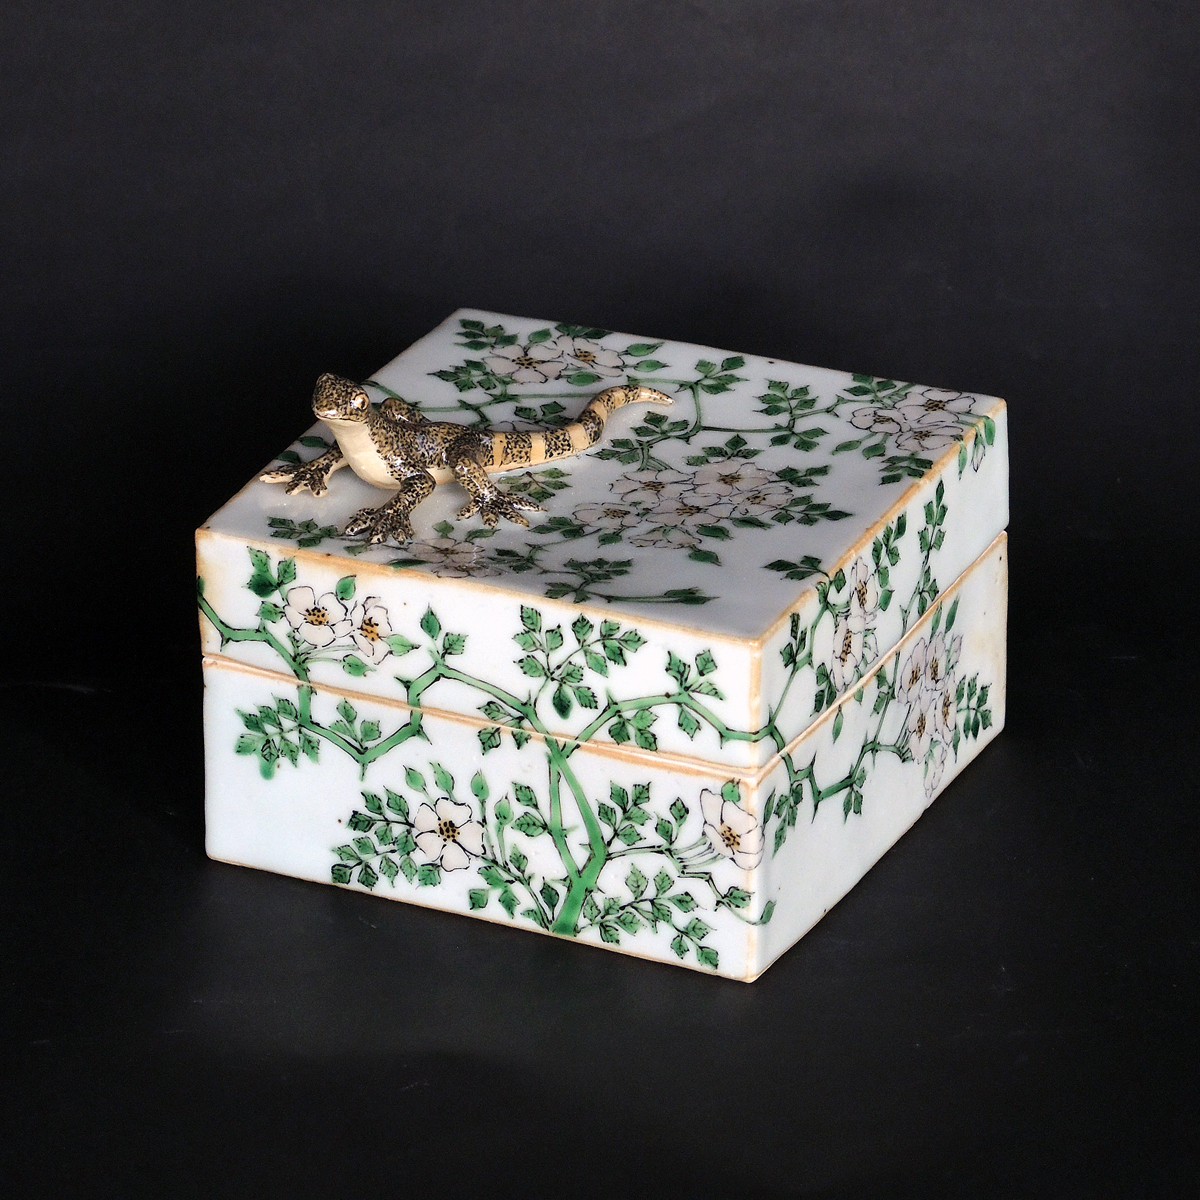 Gecko and Wild Rose Box